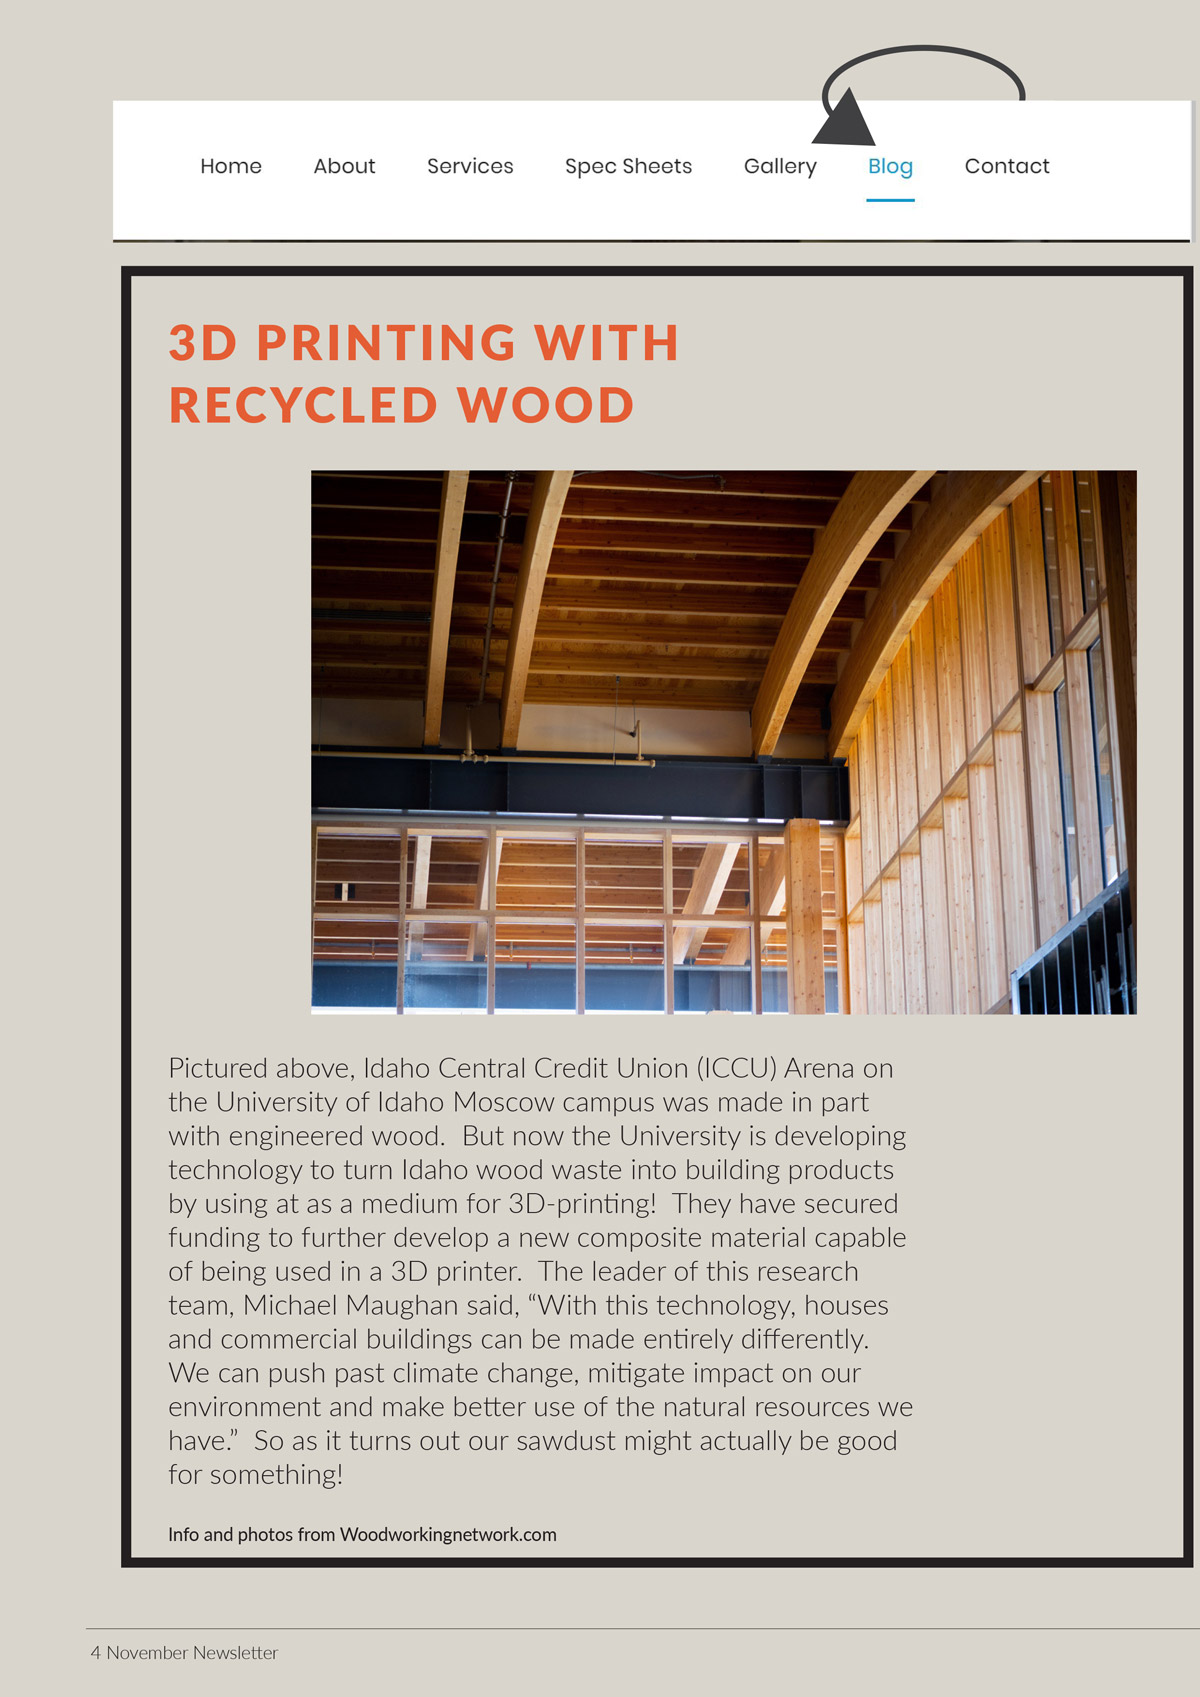 3D Printing with recycled wood. University of Idaho is developing technology to turn Idaho wood waste into building products by using it as a medium for 3D-printing!